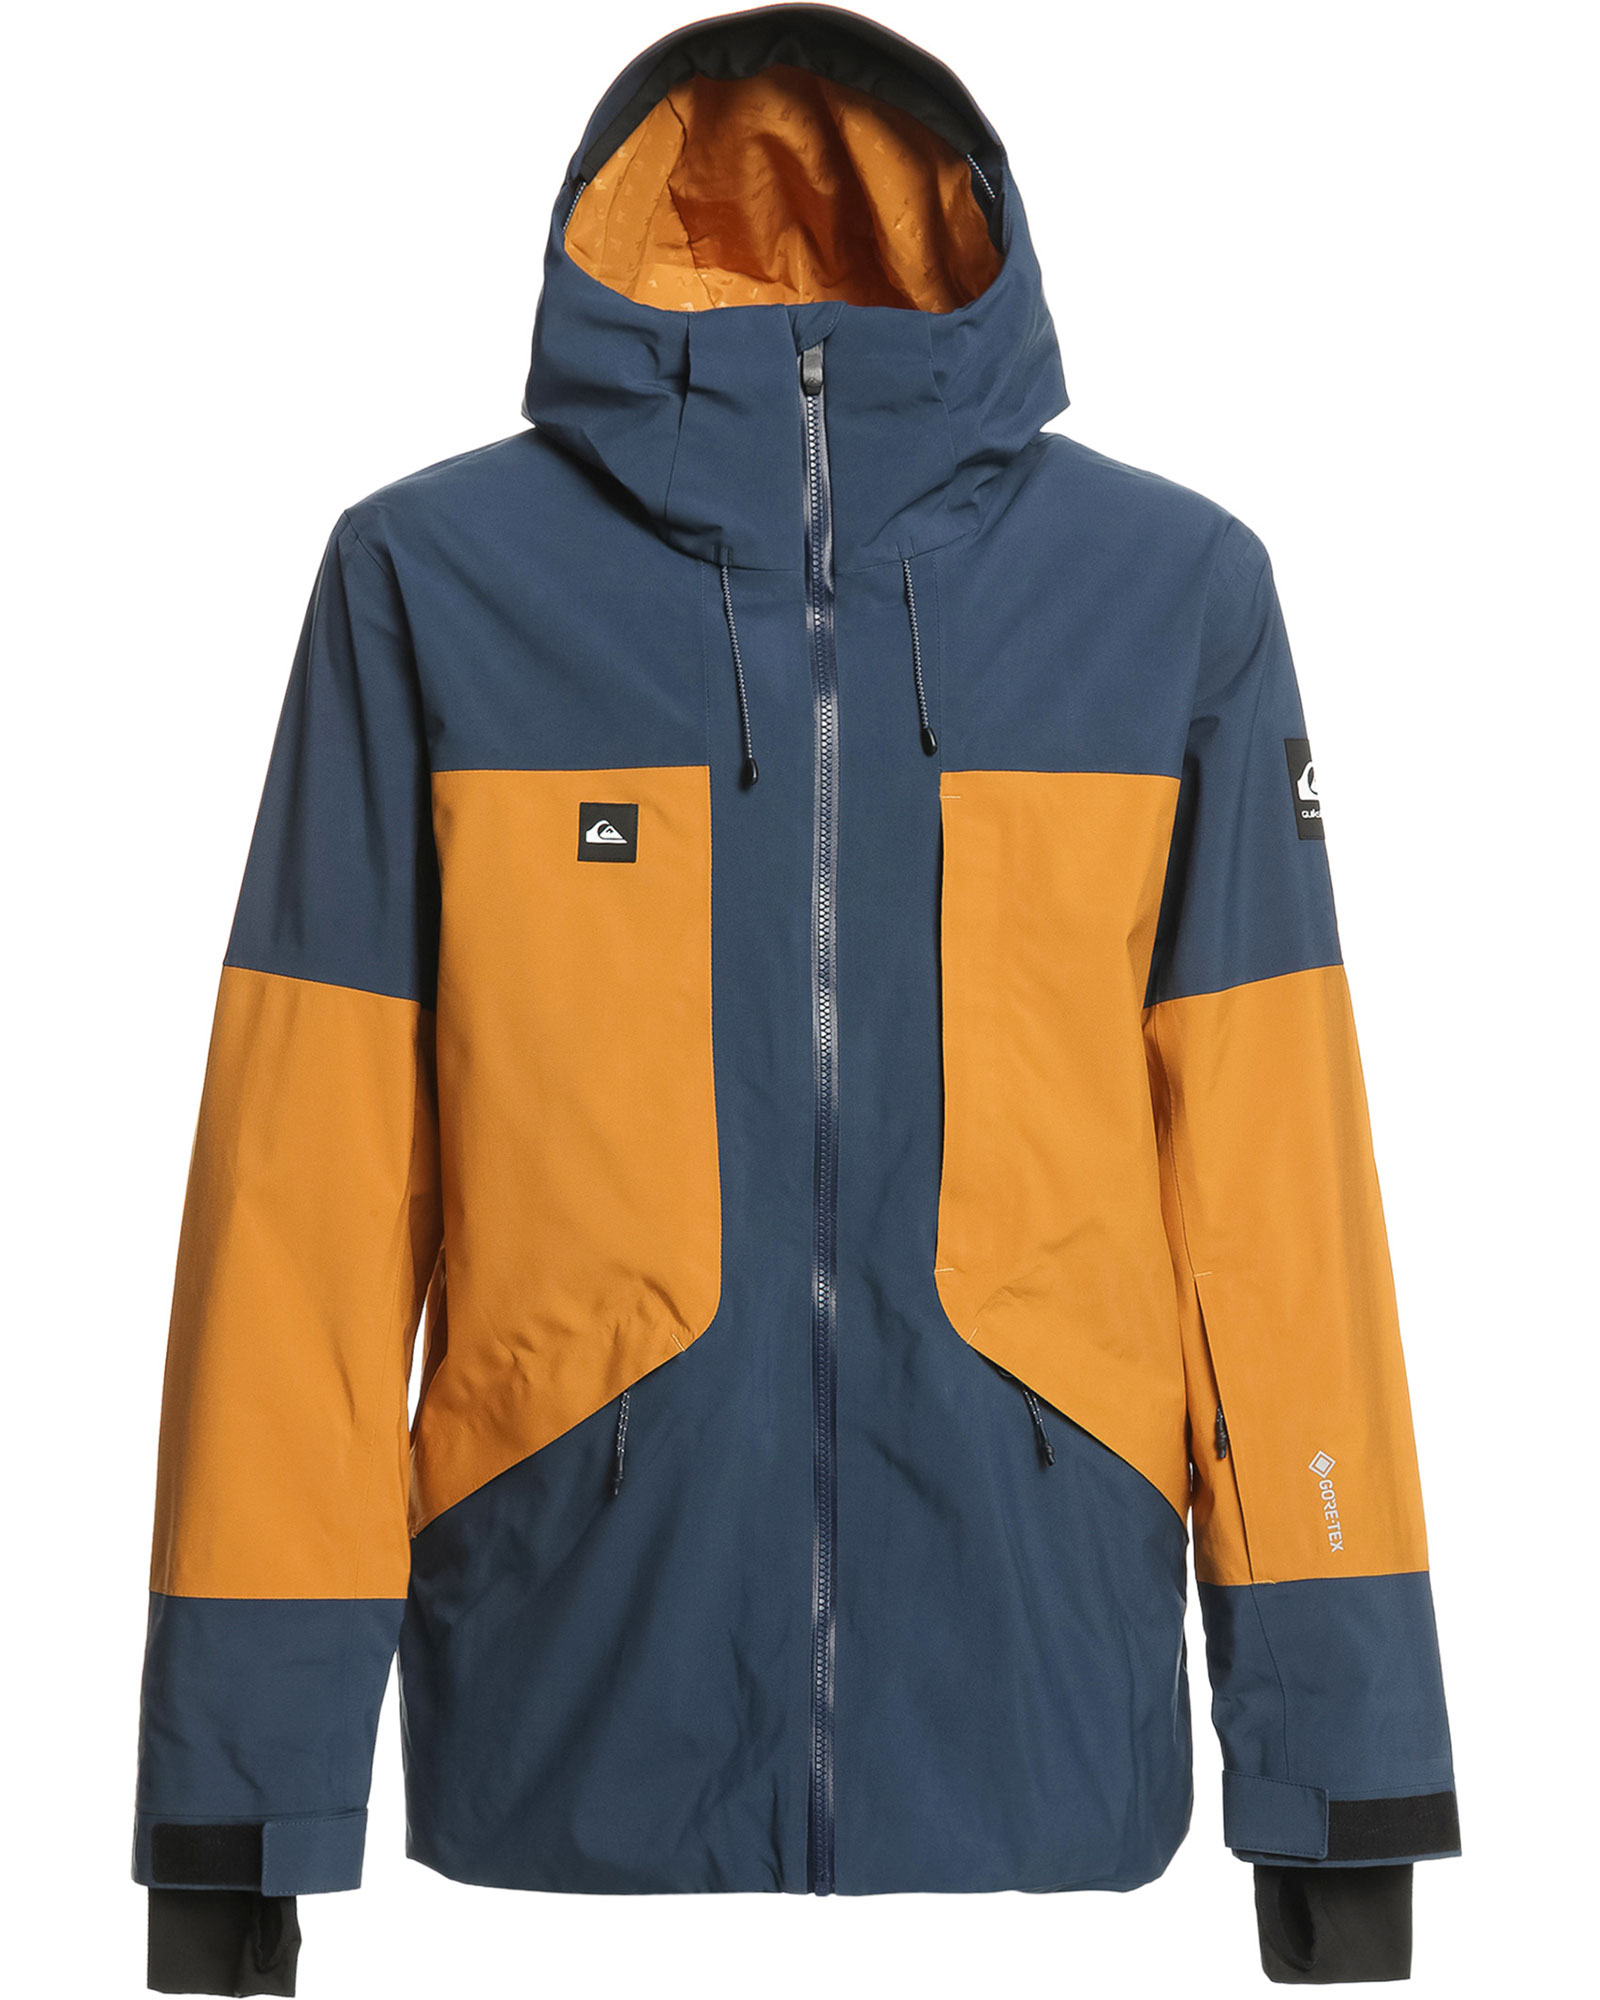 Quiksilver Forever Stretch GORE TEX Insulated Men’s Jacket - Insignia Blue L